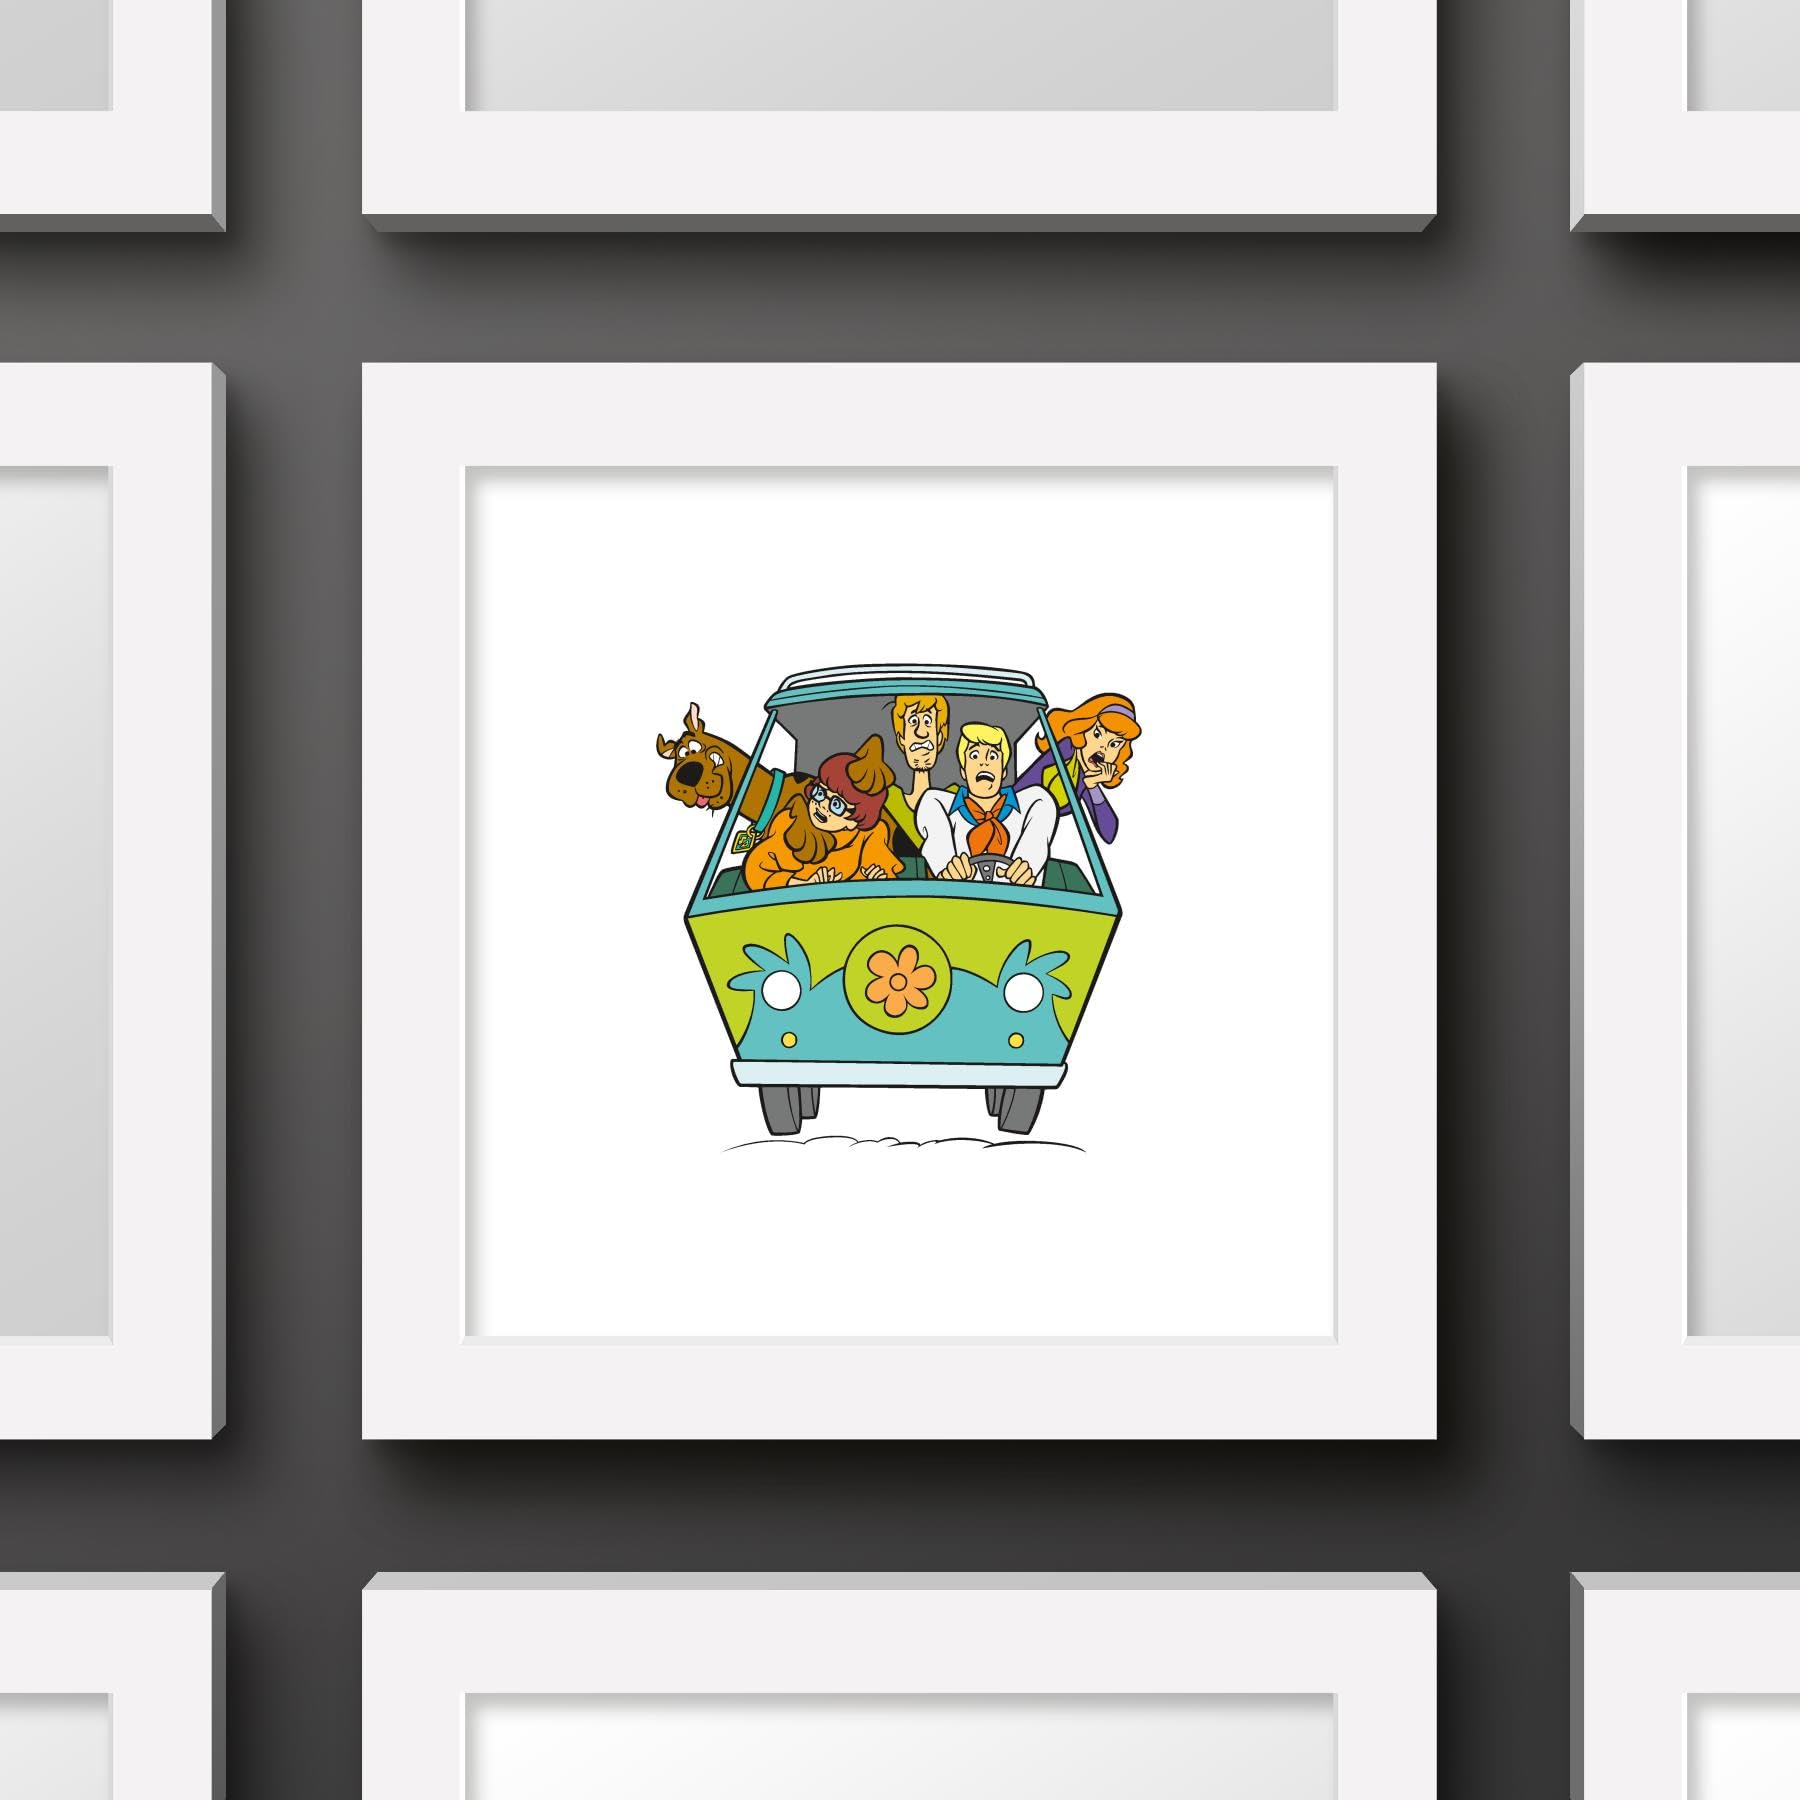  Scooby-Doo Hintergrundbild 1800x1800. Trends International Gallery Pops Scooby Doo Machine Gang Wall Art Wall Poster, 12.00 X 12. White Frame Version : Everything Else